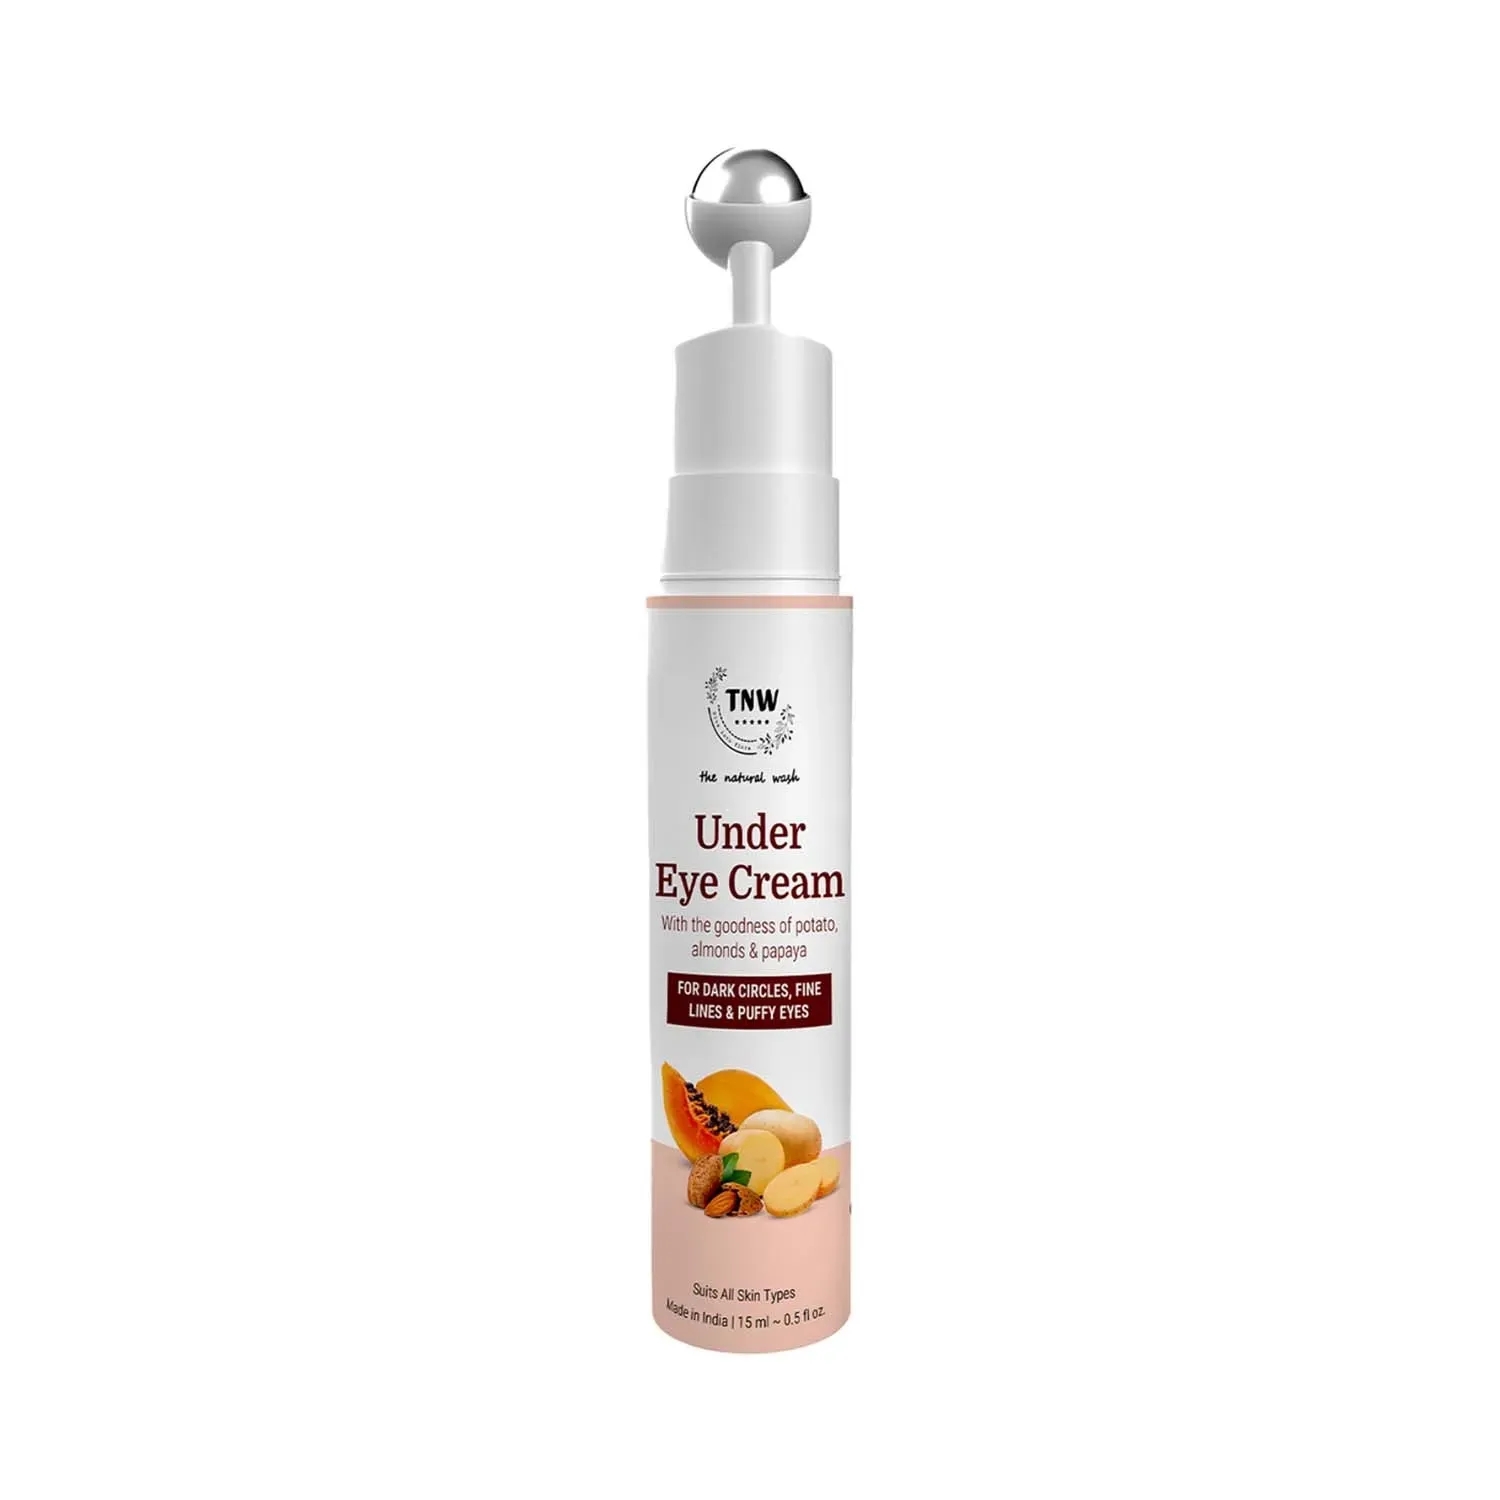 TNW The Natural Wash | TNW The Natural Wash Under Eye Cream with Cooling Massage Roller (15ml)